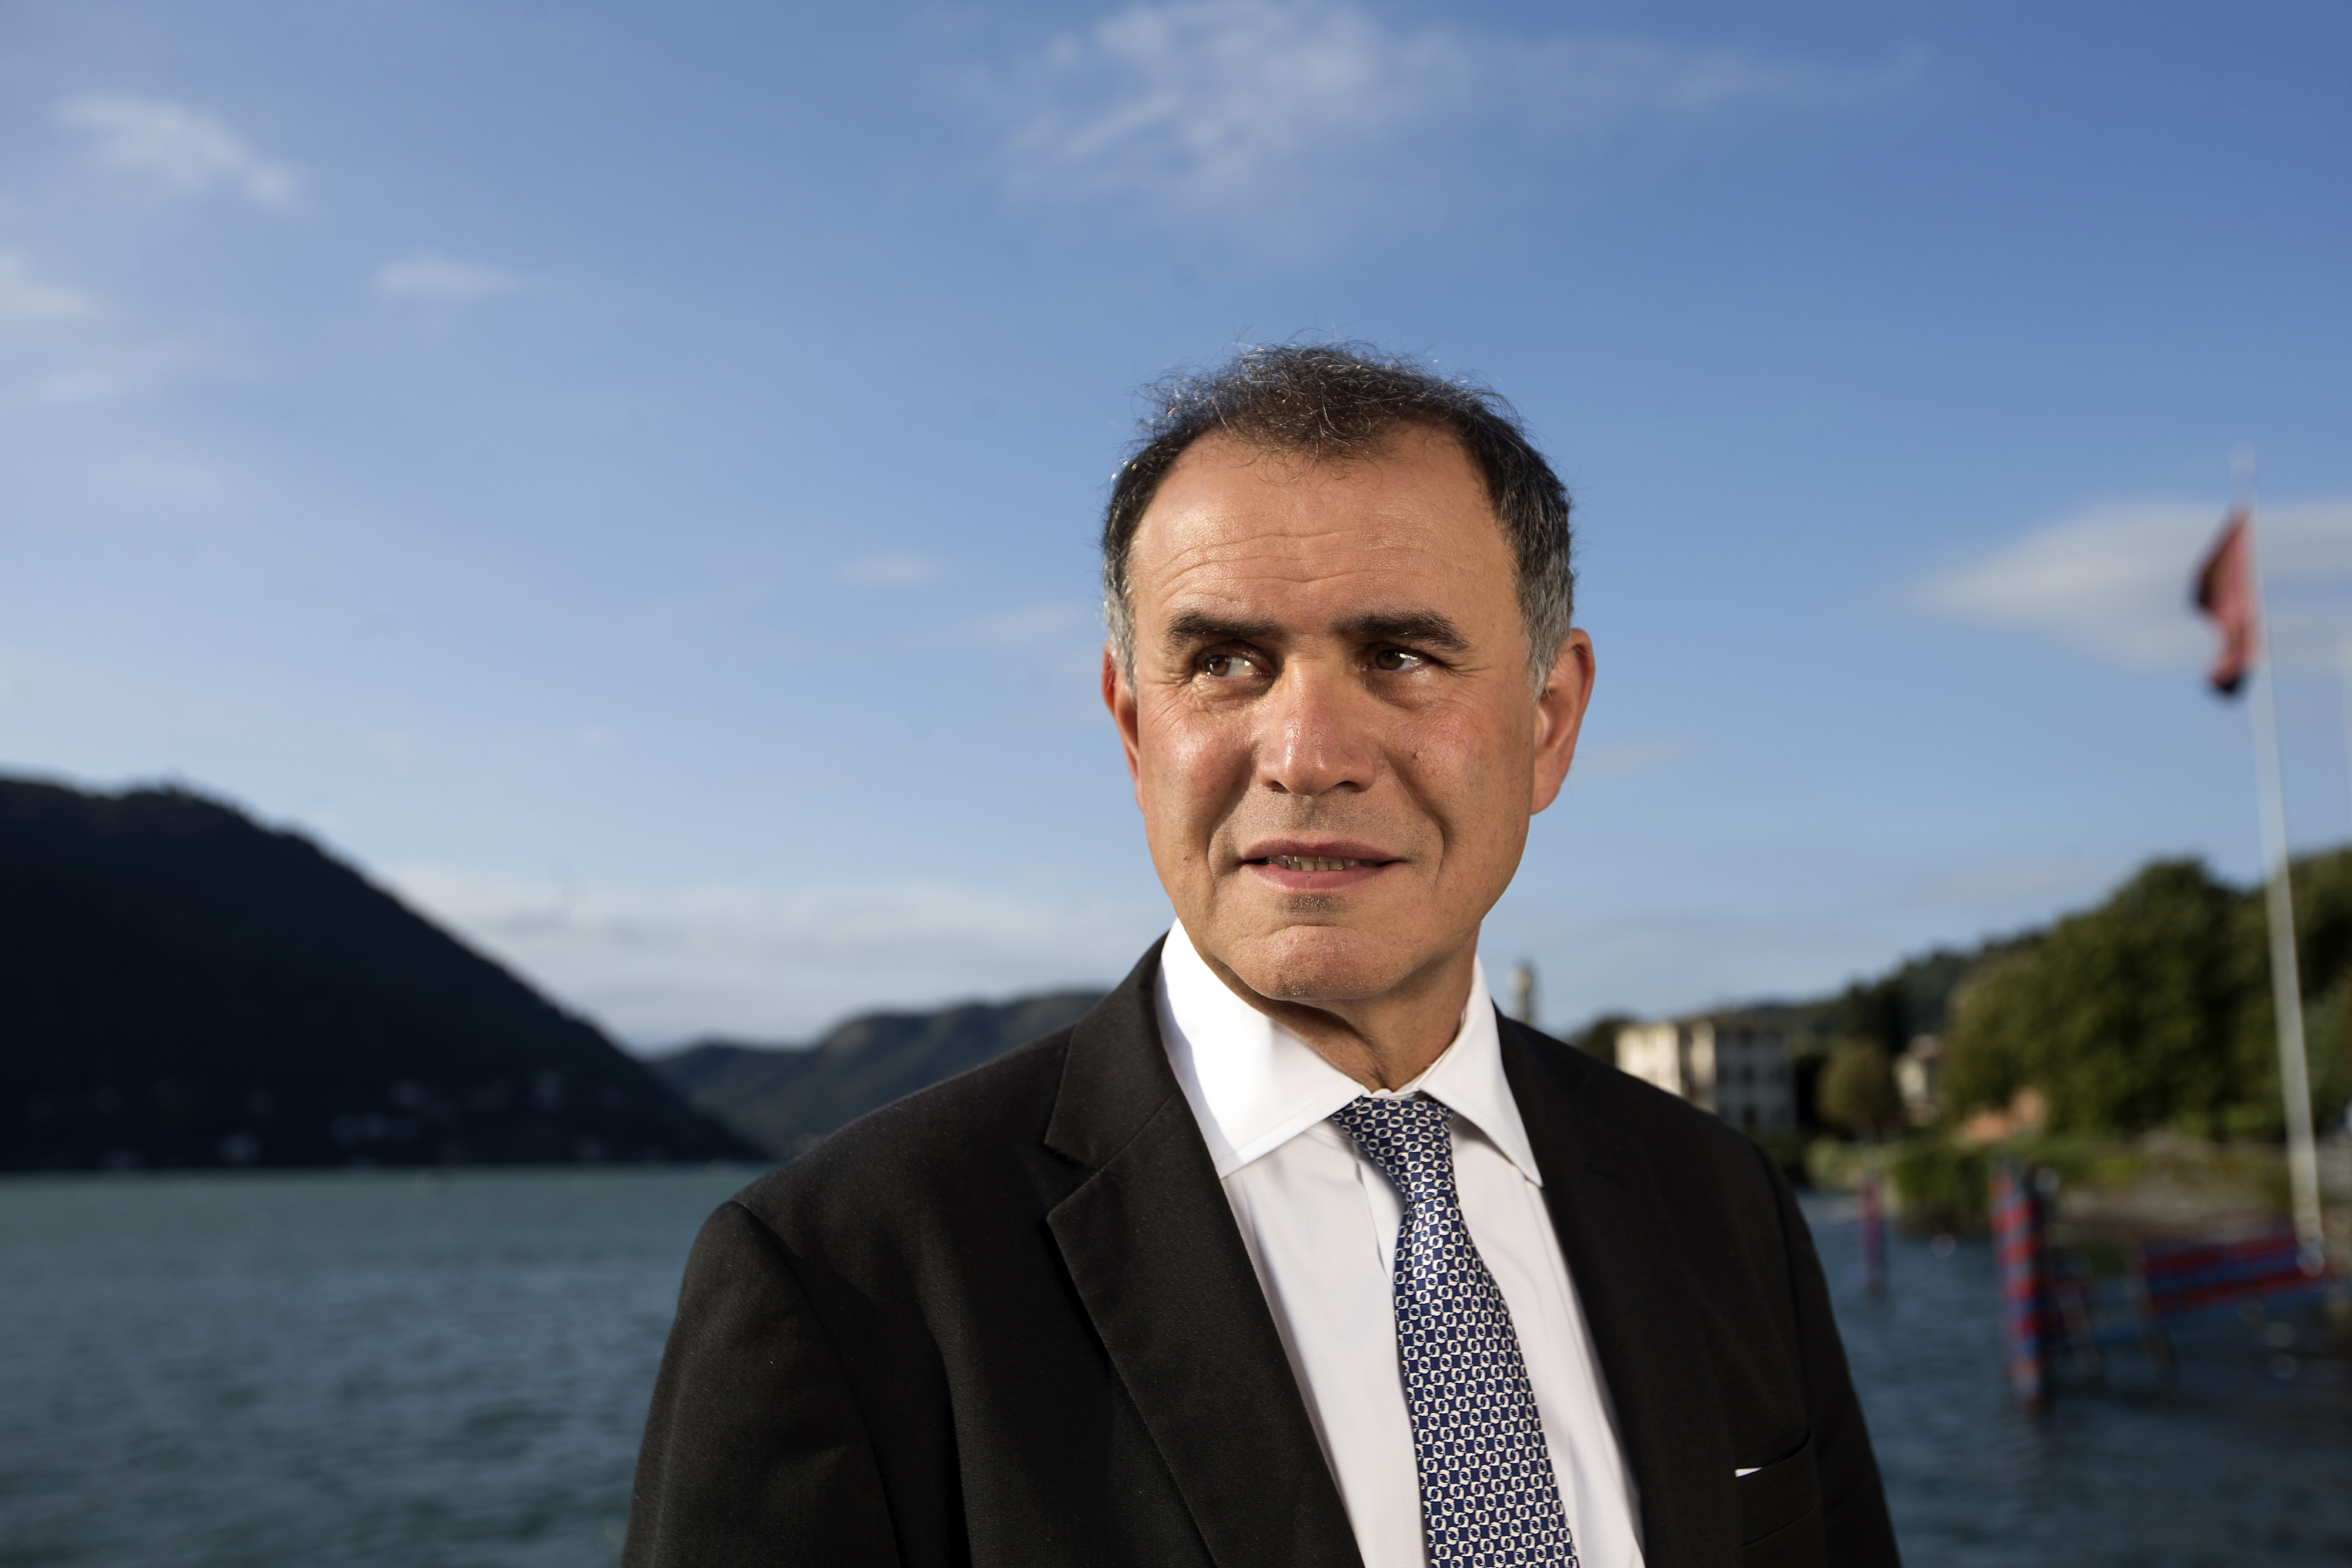 Nouriel Roubini, chairman of Roubini Global Economics, at the Ambrosetti Forum in Cernobbio, Italy, on Sept. 4, 2015. (Bloomberg via Getty Images)